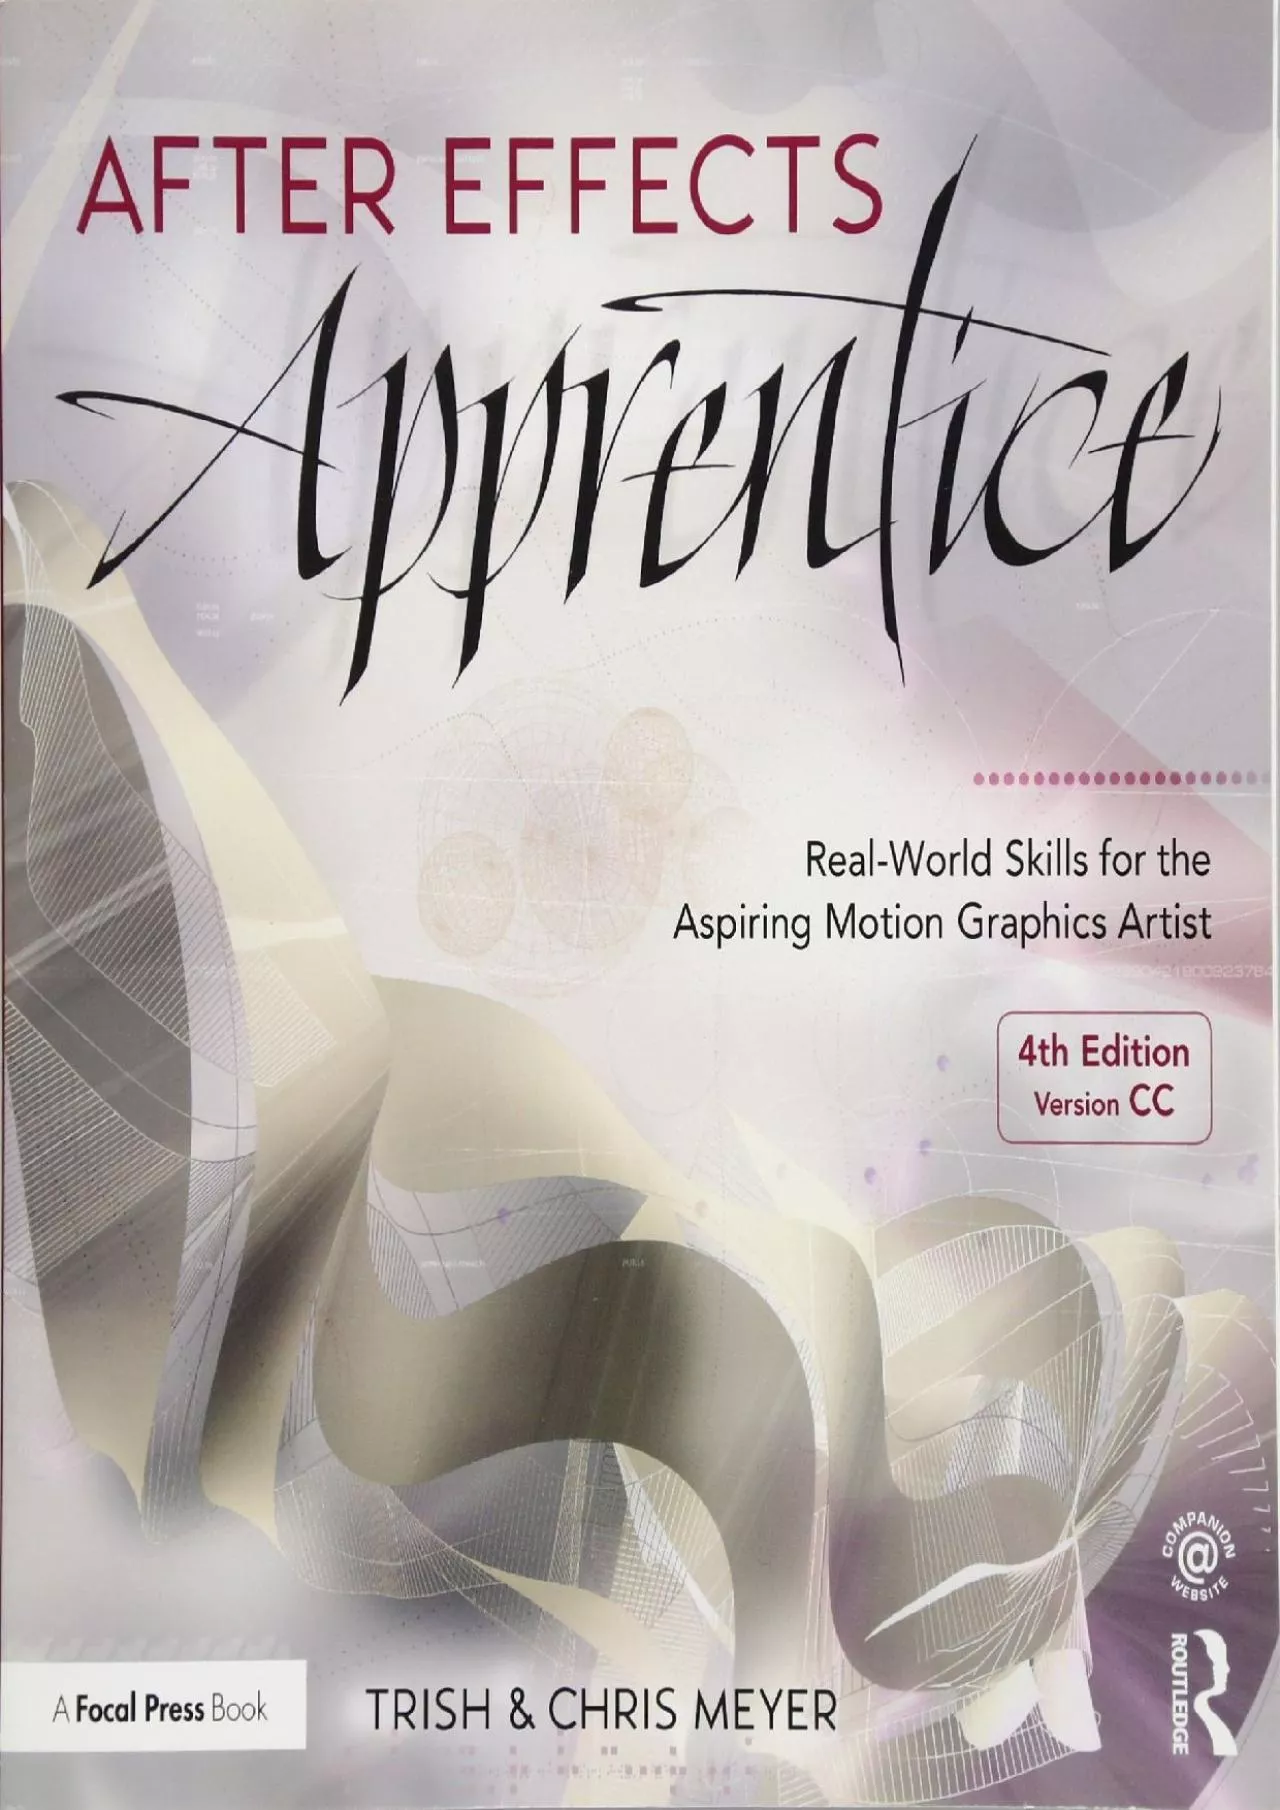 (BOOK)-After Effects Apprentice: Real-World Skills for the Aspiring Motion Graphics Artist